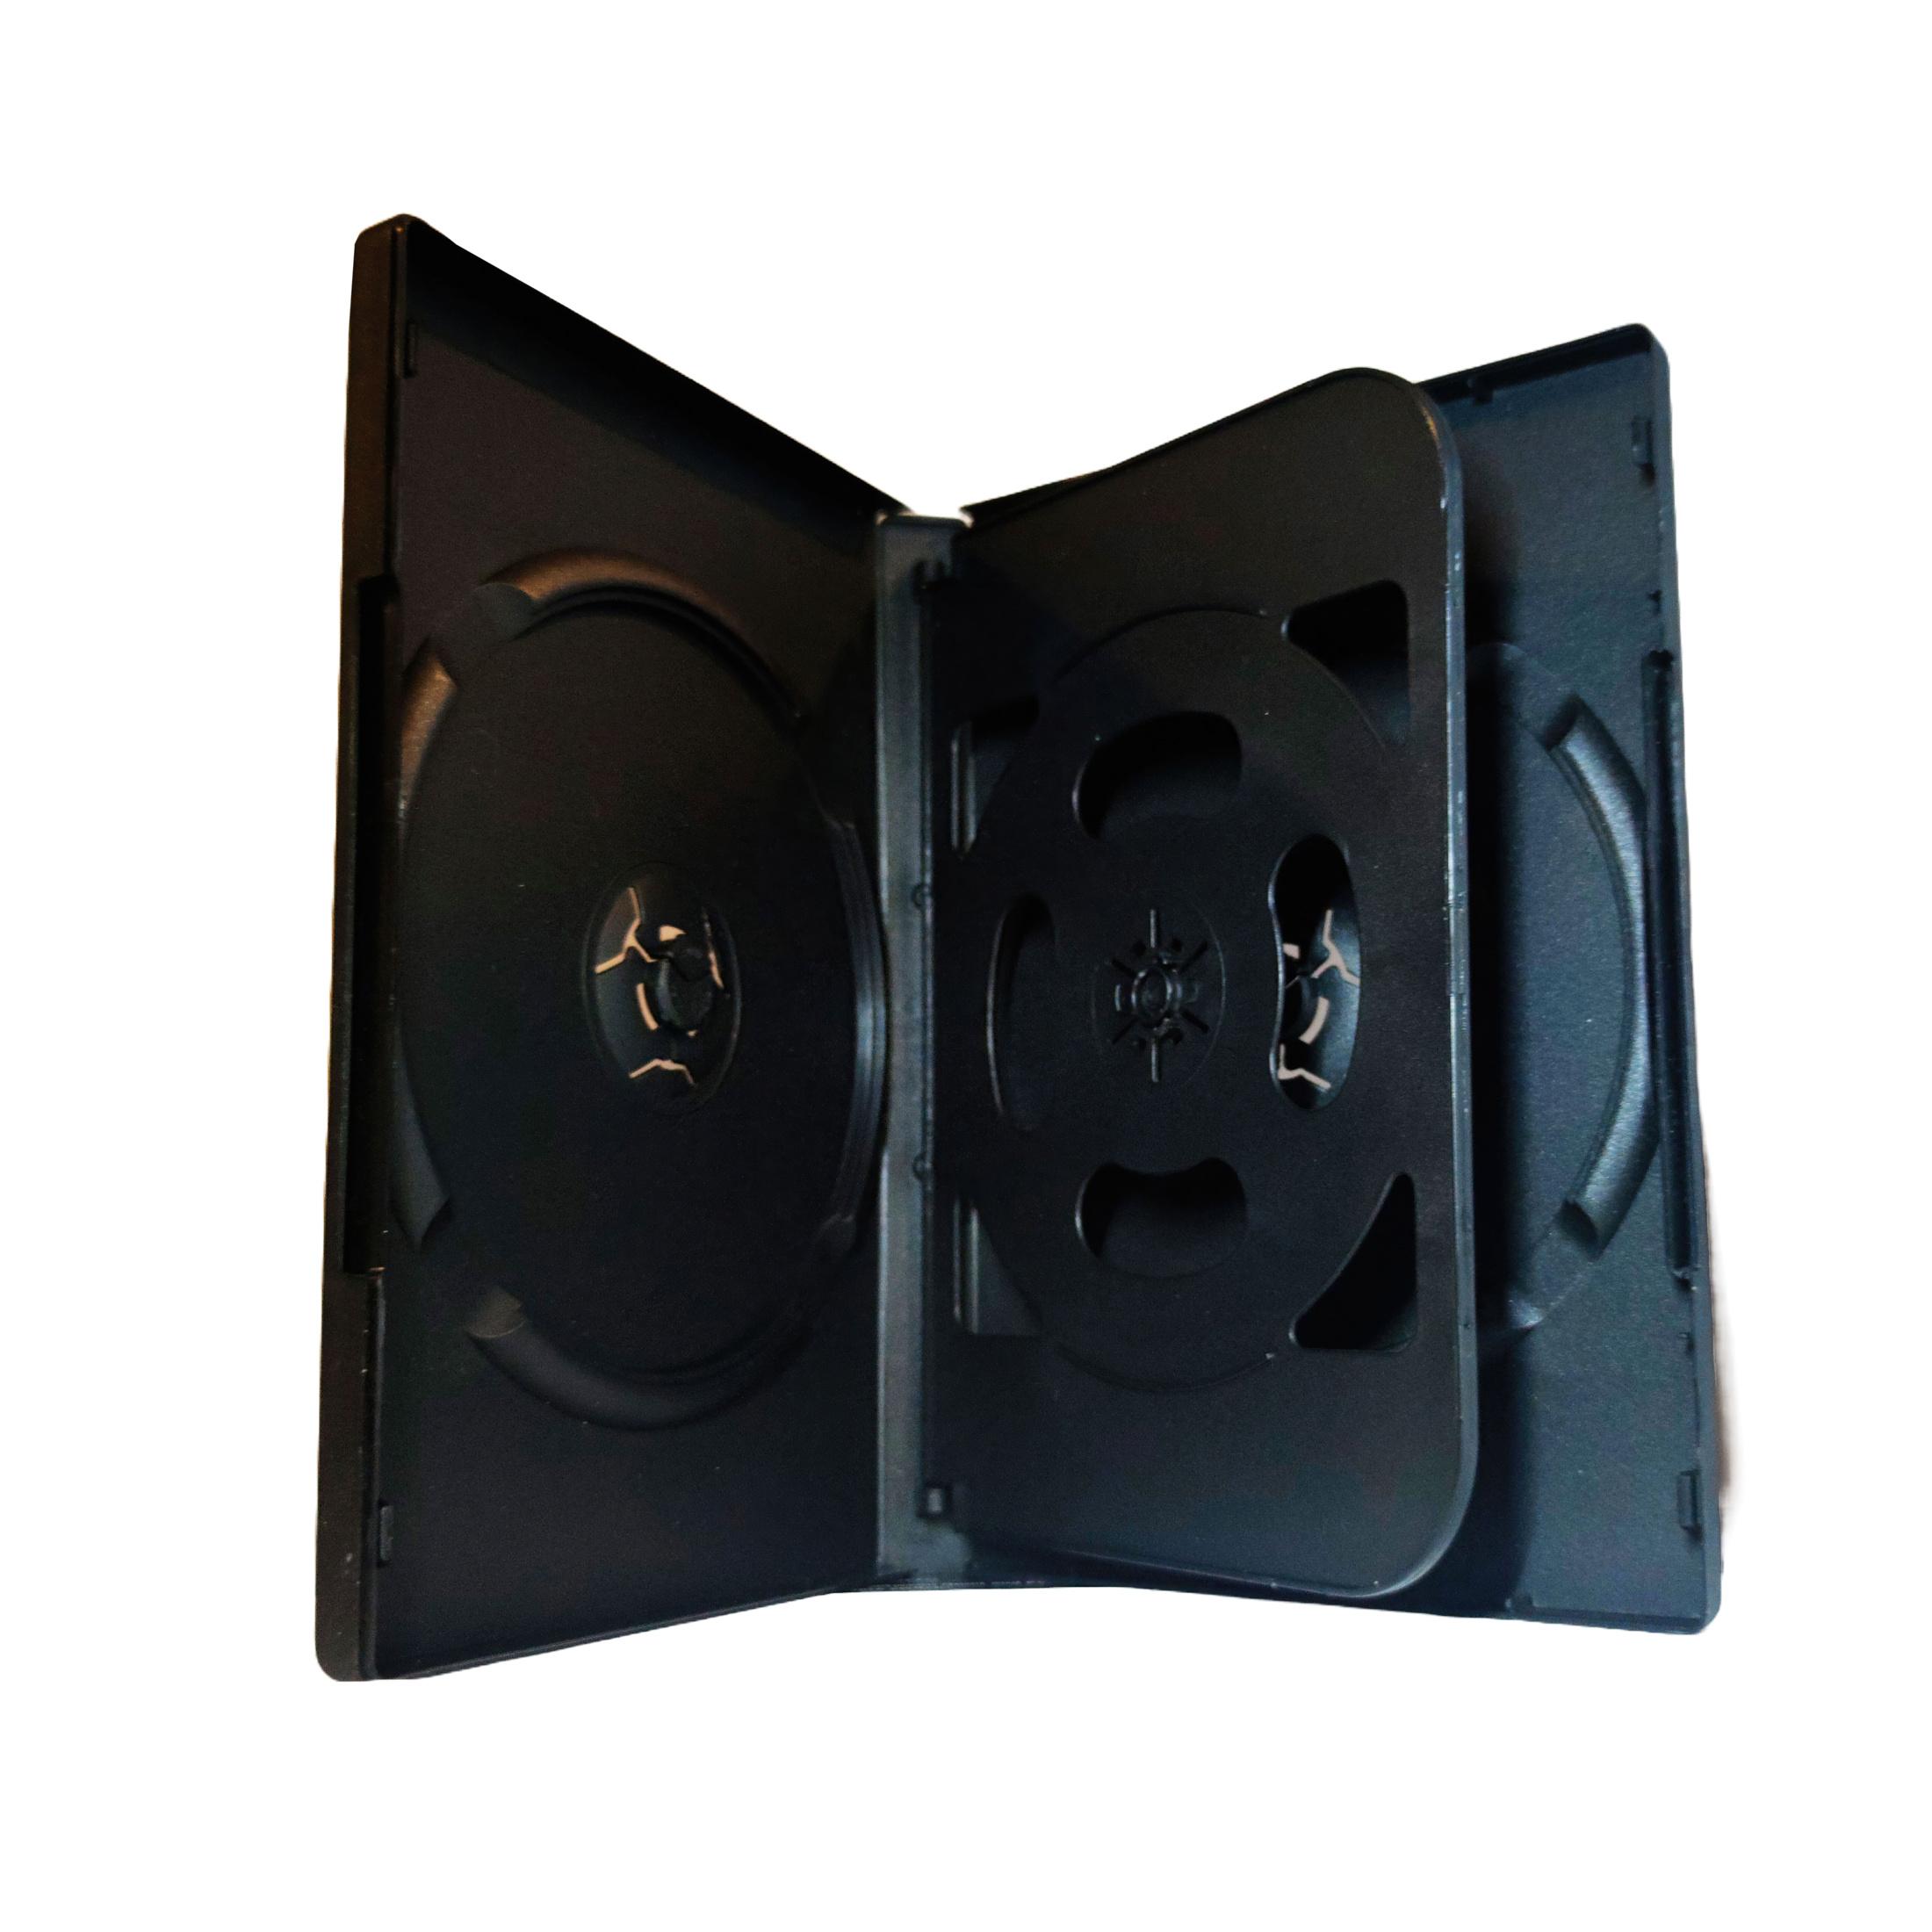 COVER IT Box: 4 DVD 19mm Black - Pack of 20